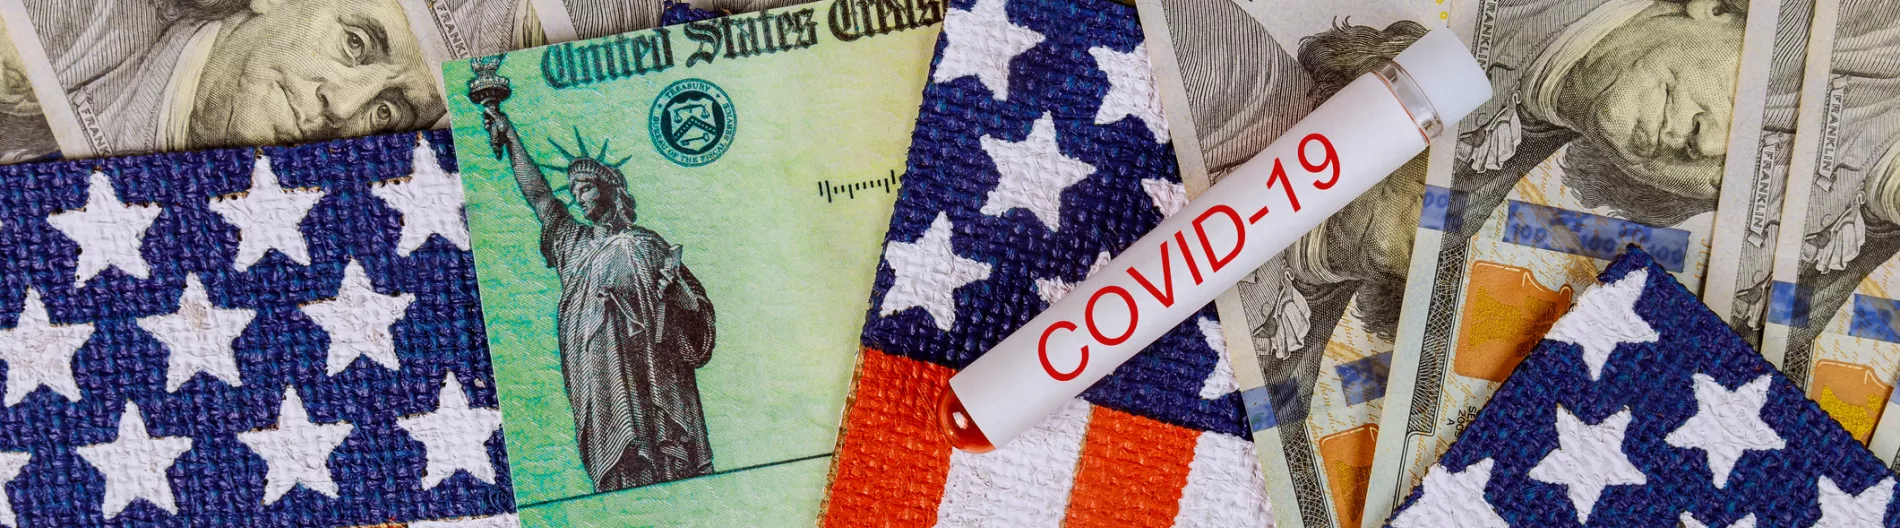 Stimulus check, money and American flags